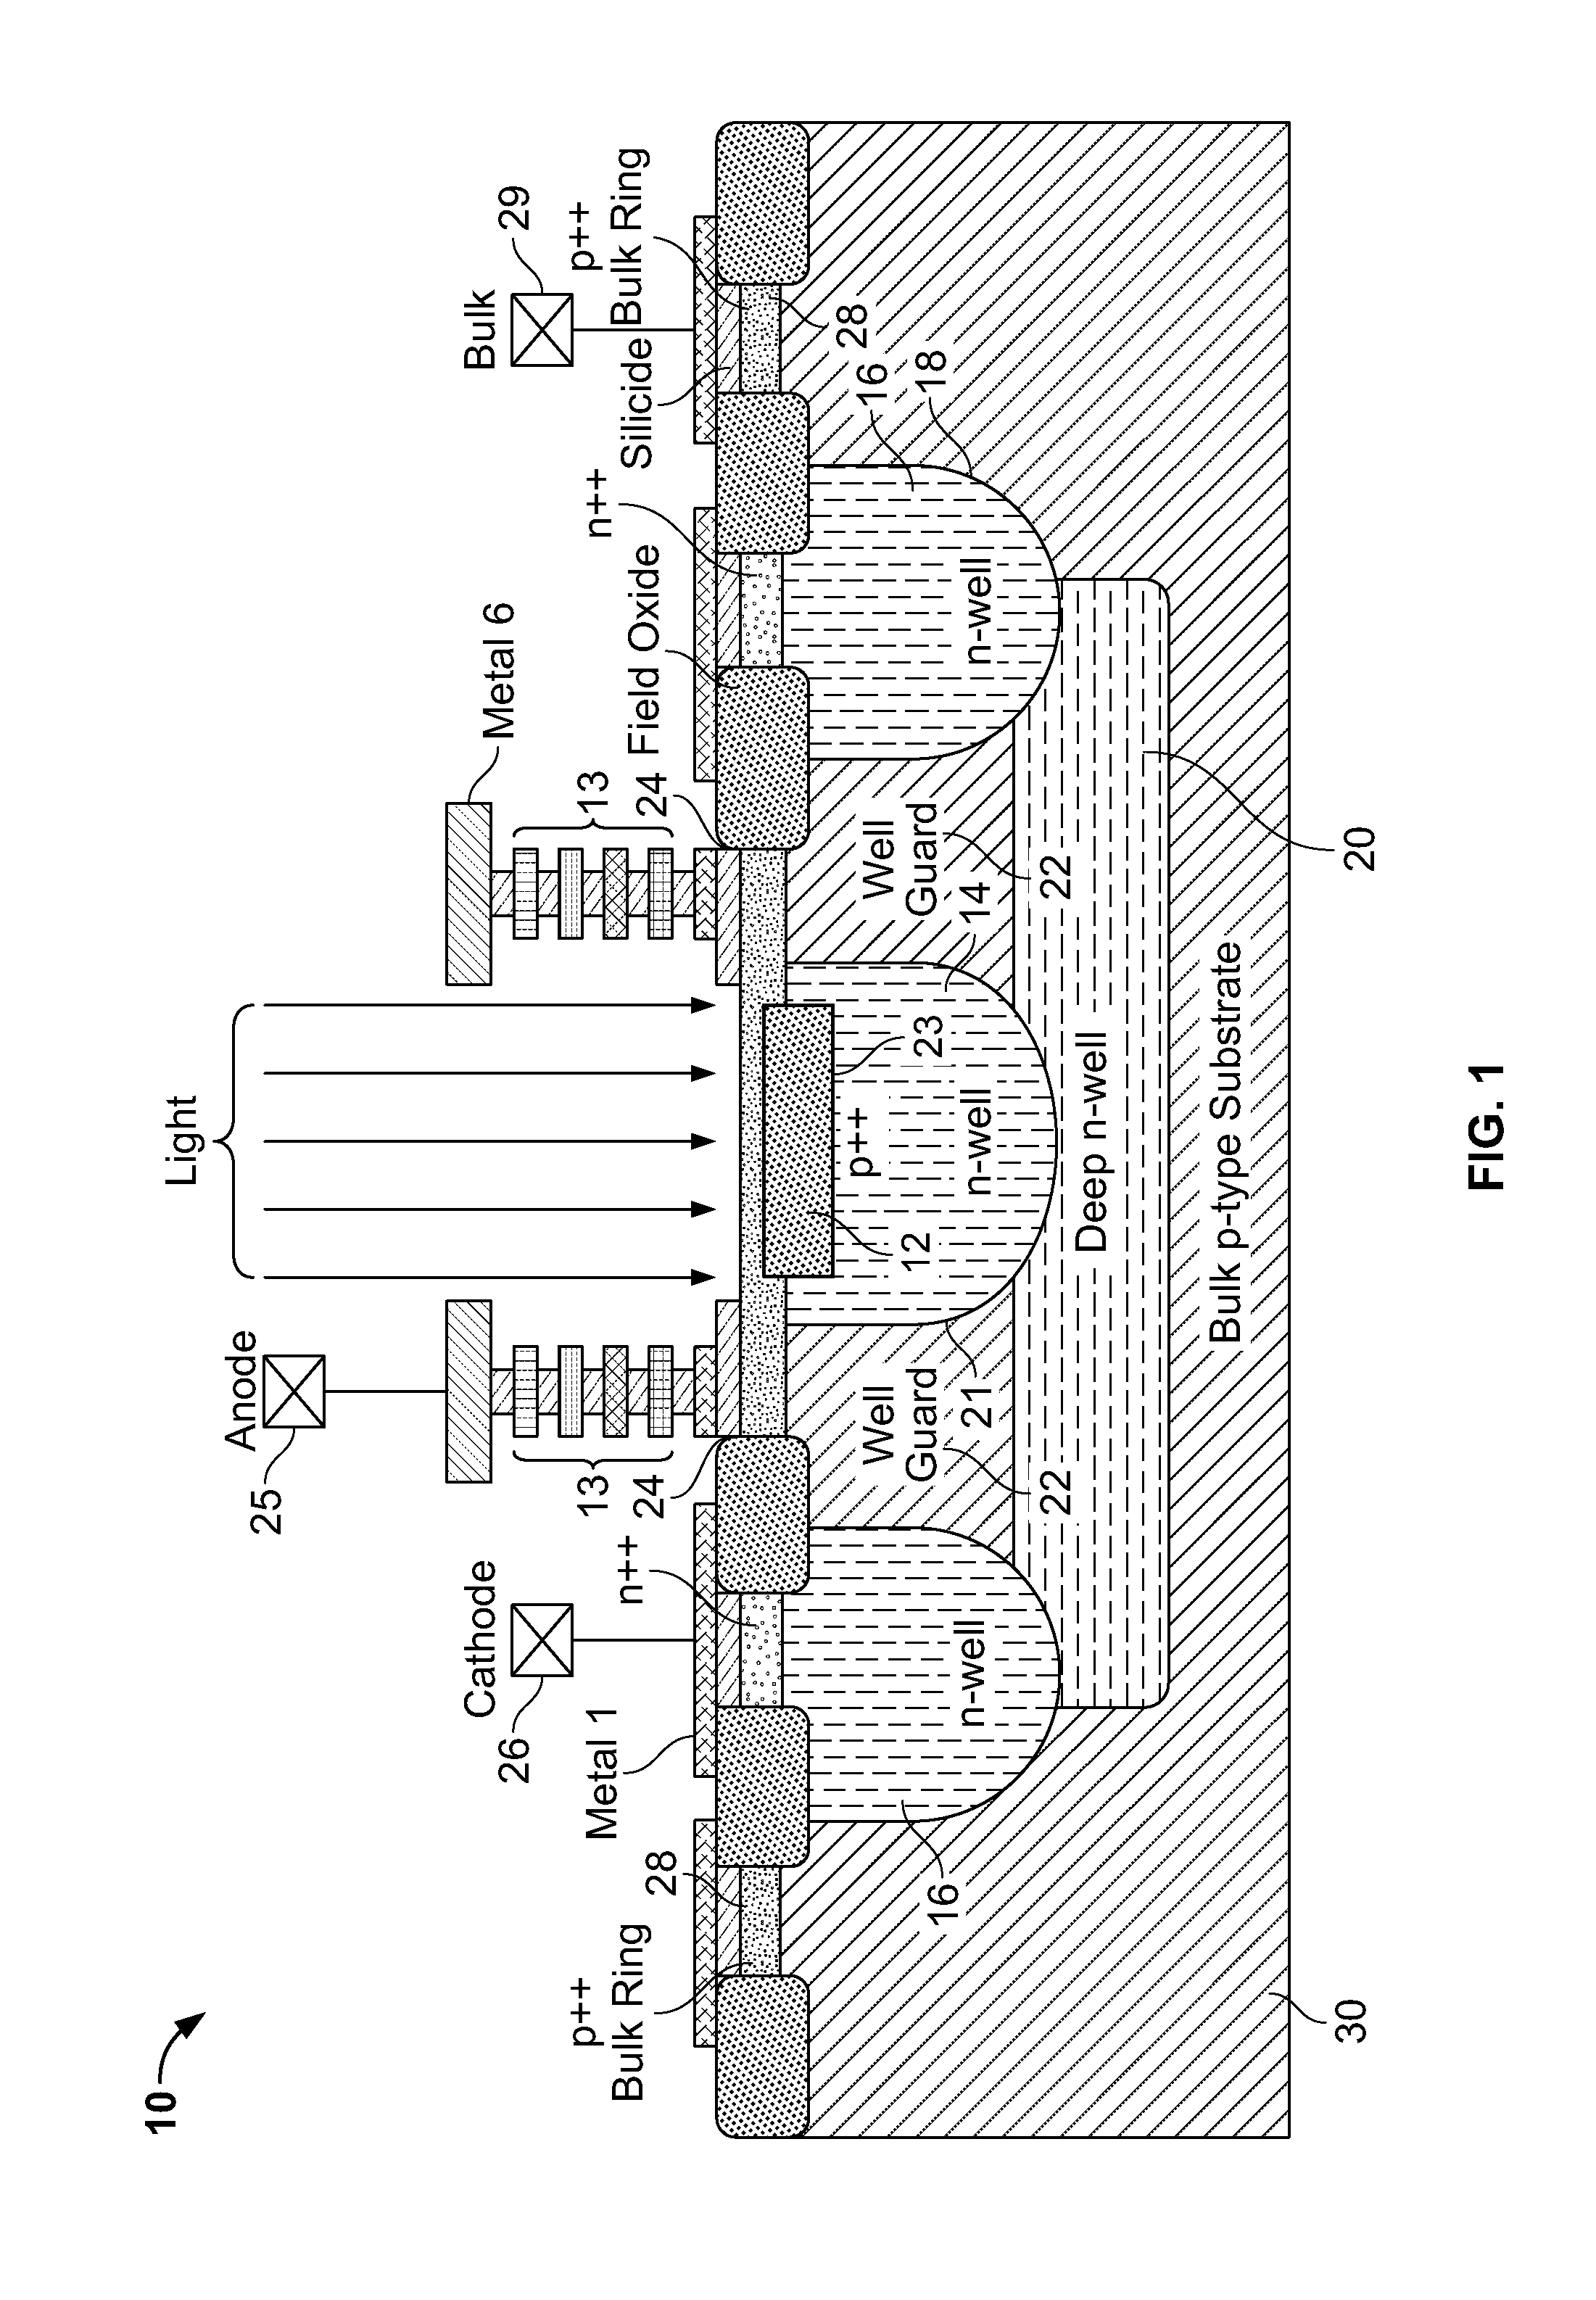 Deep submicron and nano CMOS single photon photodetector pixel with event based circuits for readout data-rate reduction communication system